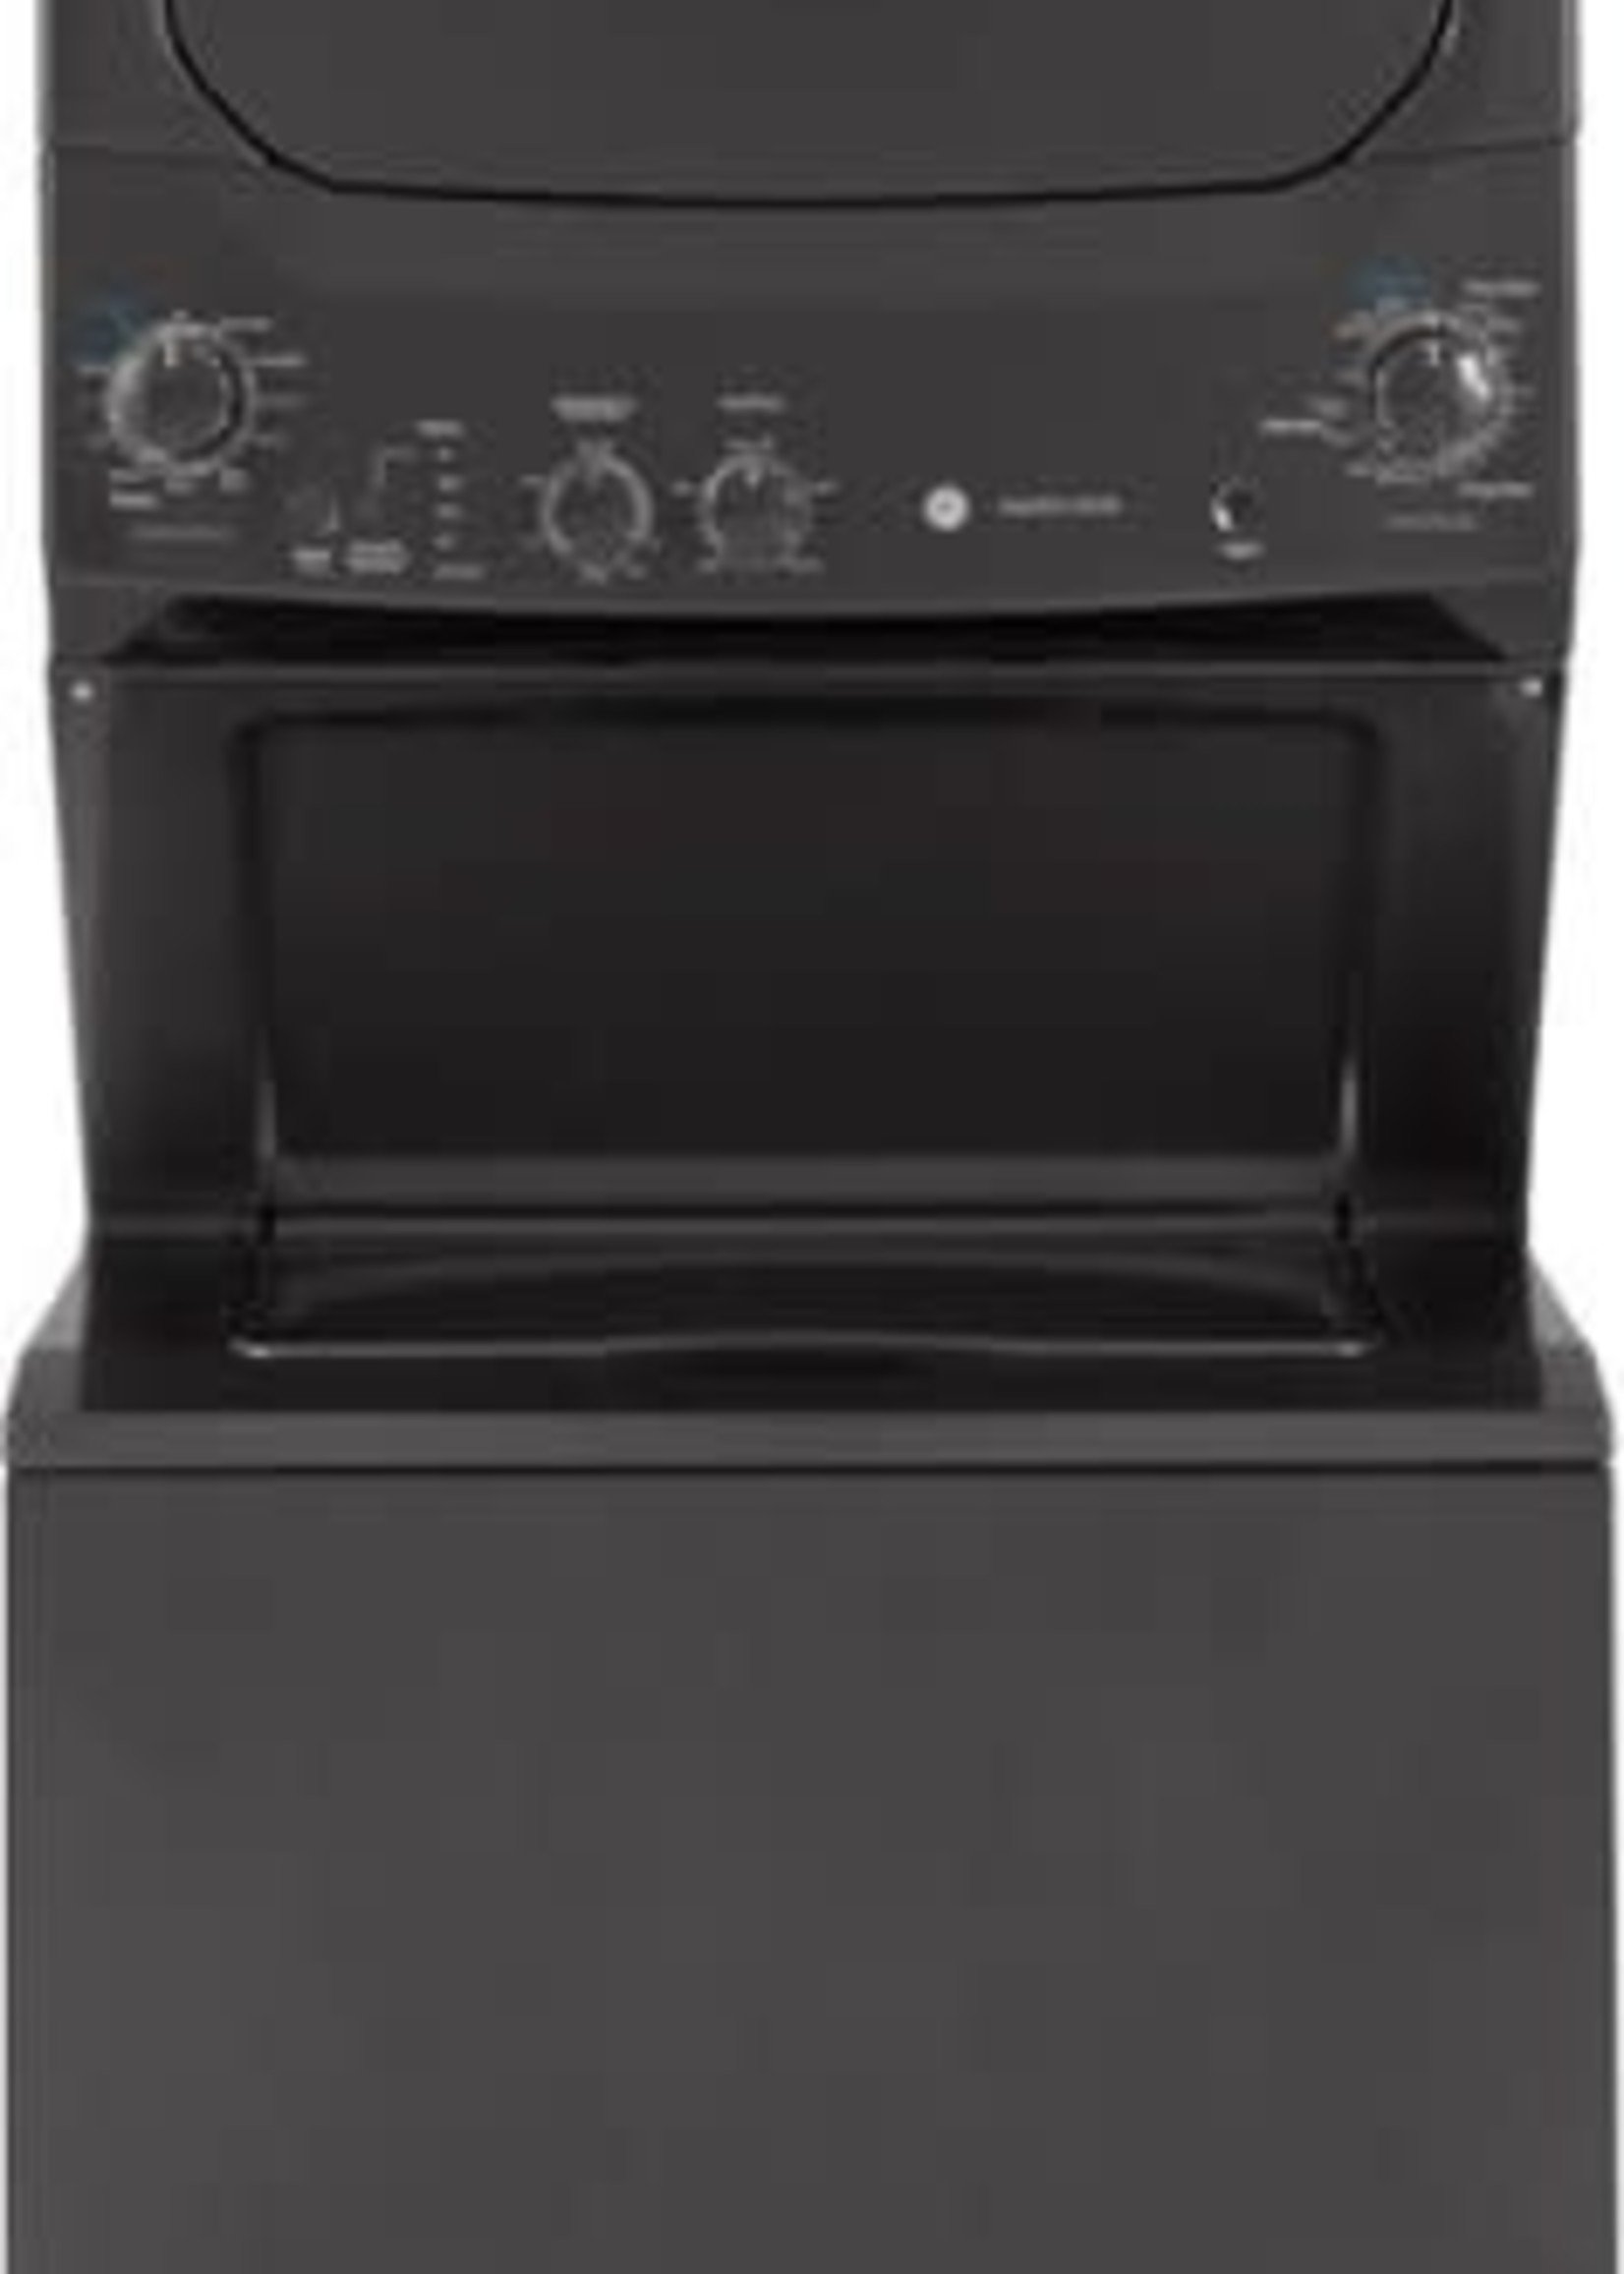 GE *GE  GUD27ESPMDG  3.8 Cu. Ft. Top Load Washer and 5.9 Cu. Ft. Electric Dryer Laundry Center - Diamond gray